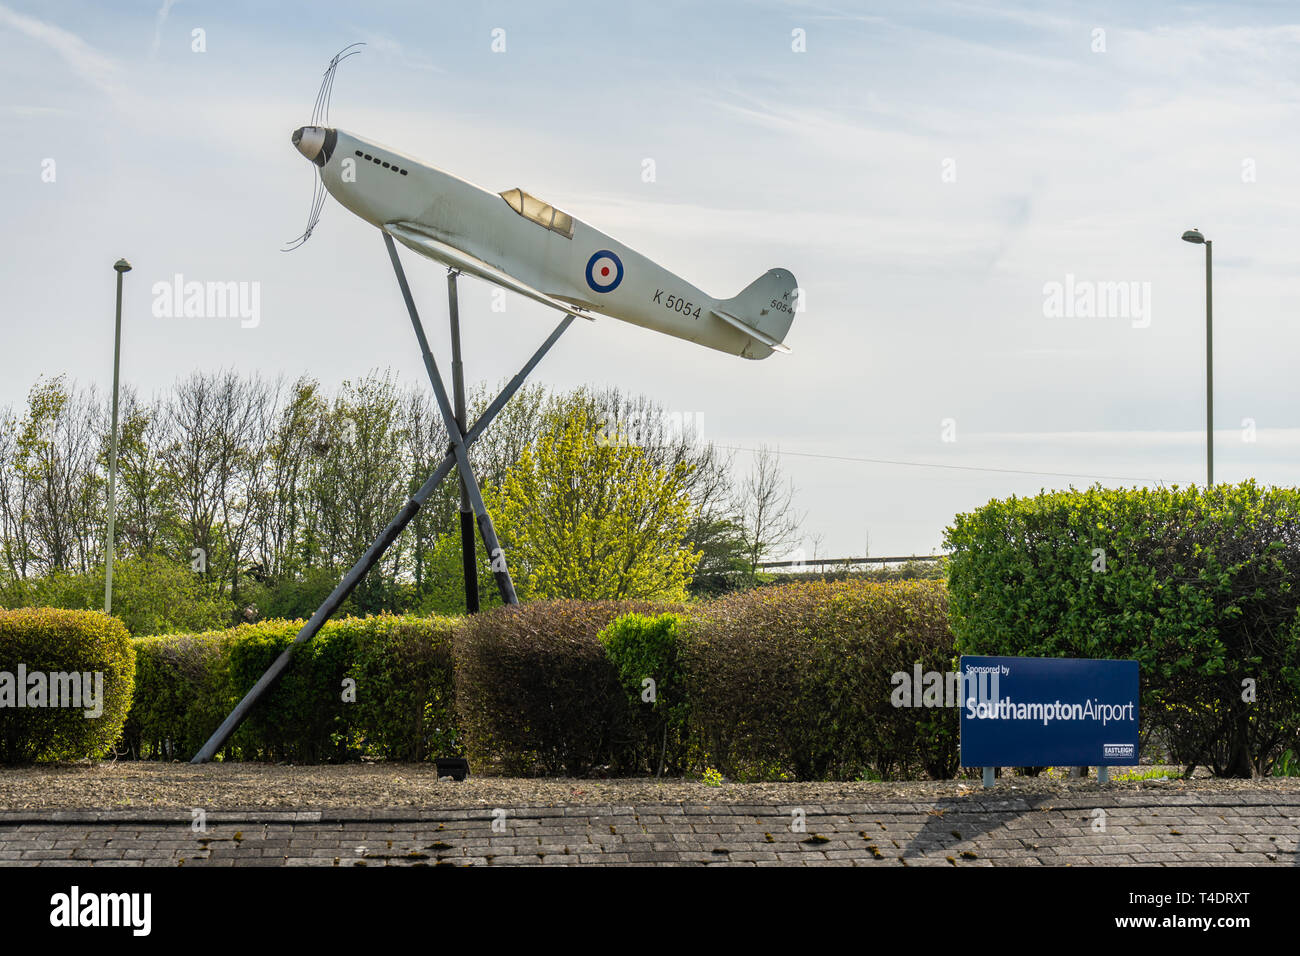 Near full size sculpture of a K5054 spitfire air plane, the prototype of the spitfire aircraft outside Southampton Airport, Southampton, England, UK Stock Photo